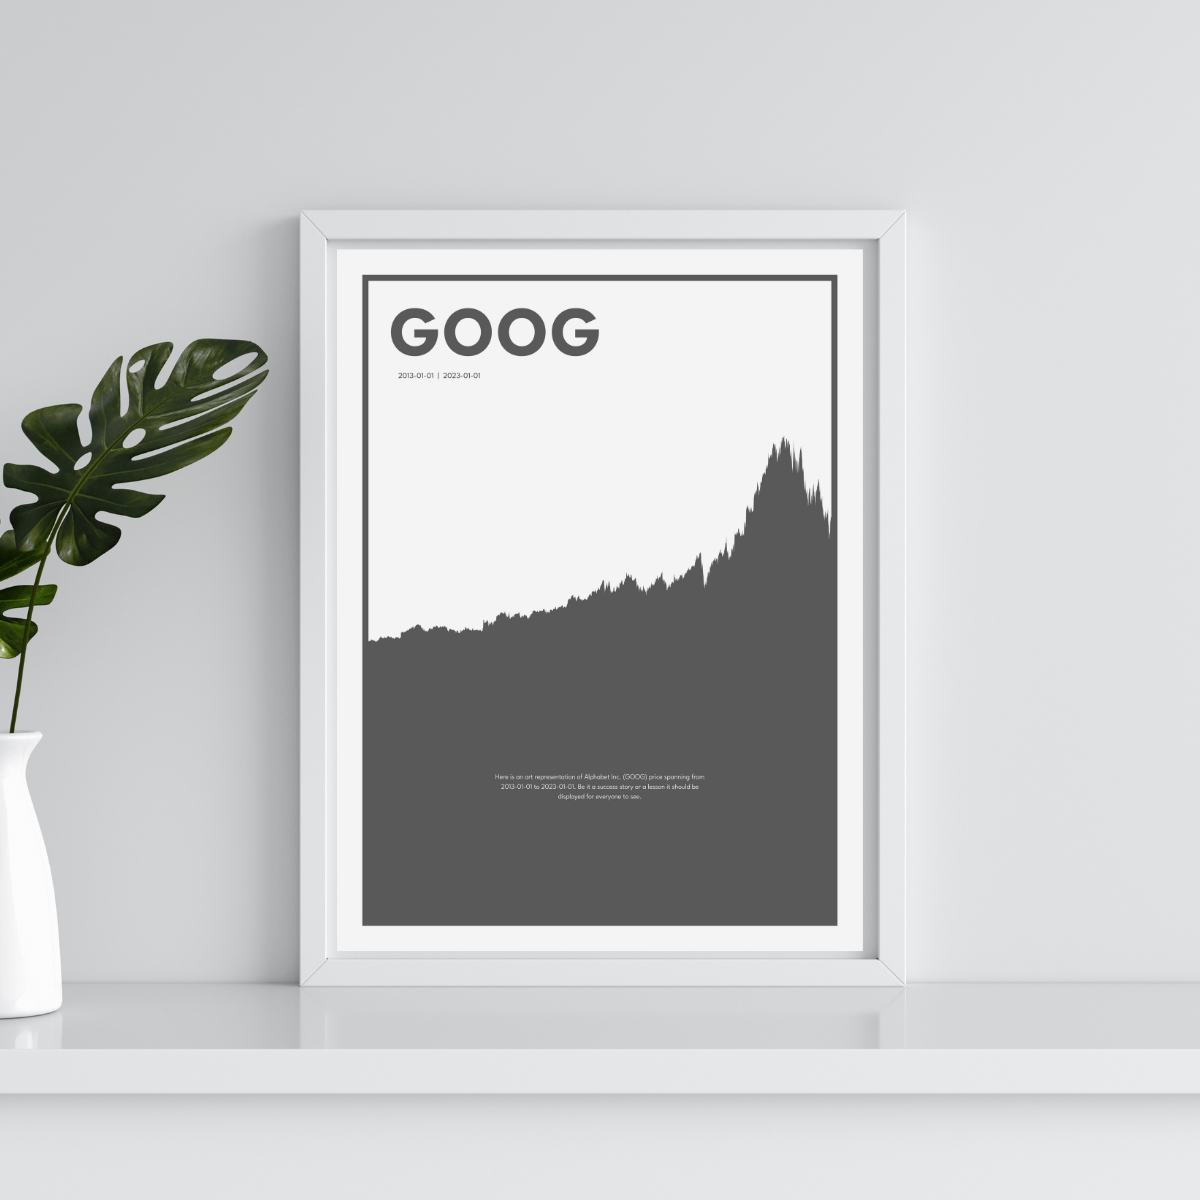 Google (GOOG) trading poster hanging on a wall